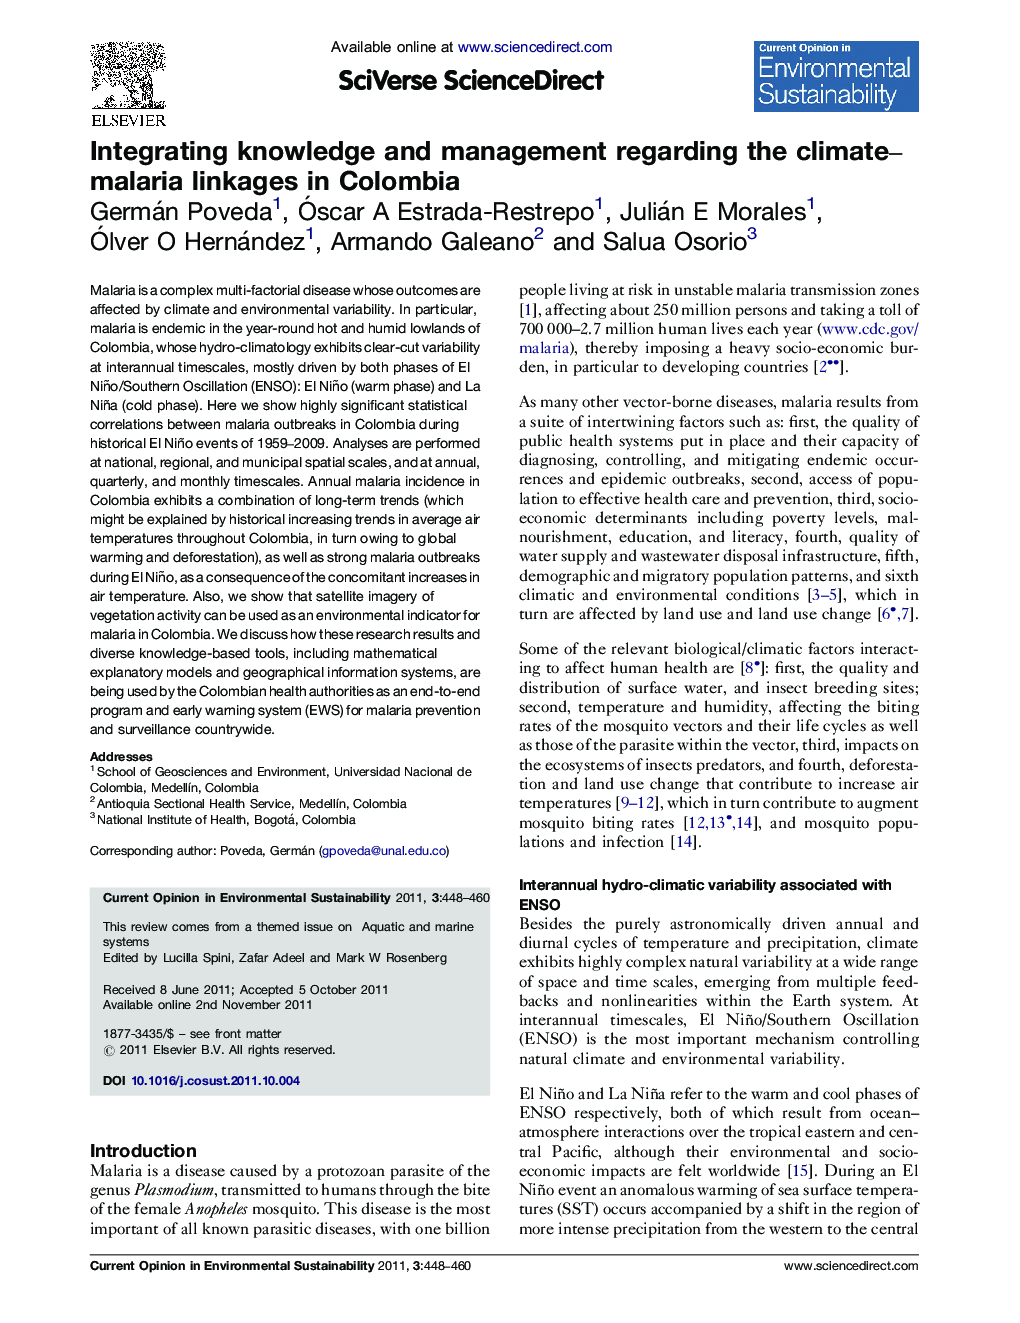 Integrating knowledge and management regarding the climate–malaria linkages in Colombia